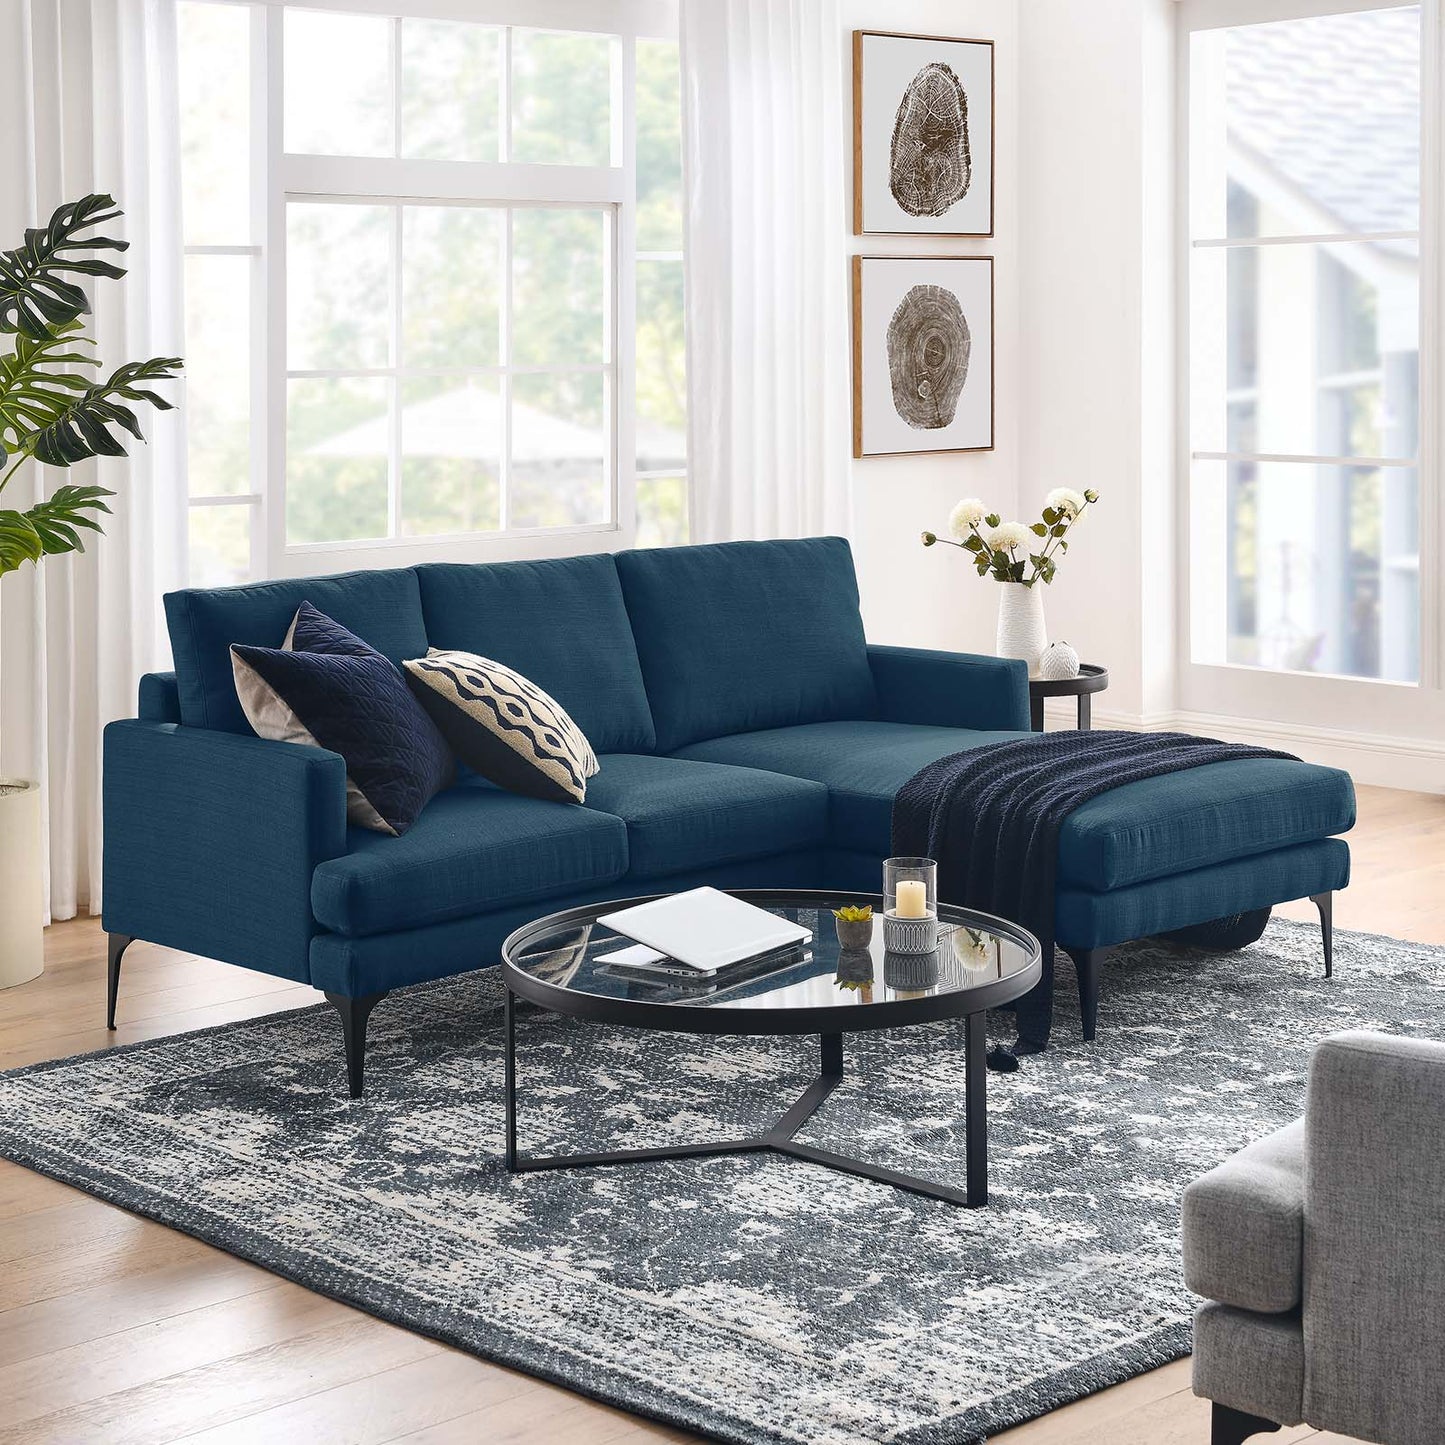 Evermore Right-Facing Upholstered Fabric Sectional Sofa Azure EEI-6012-AZU